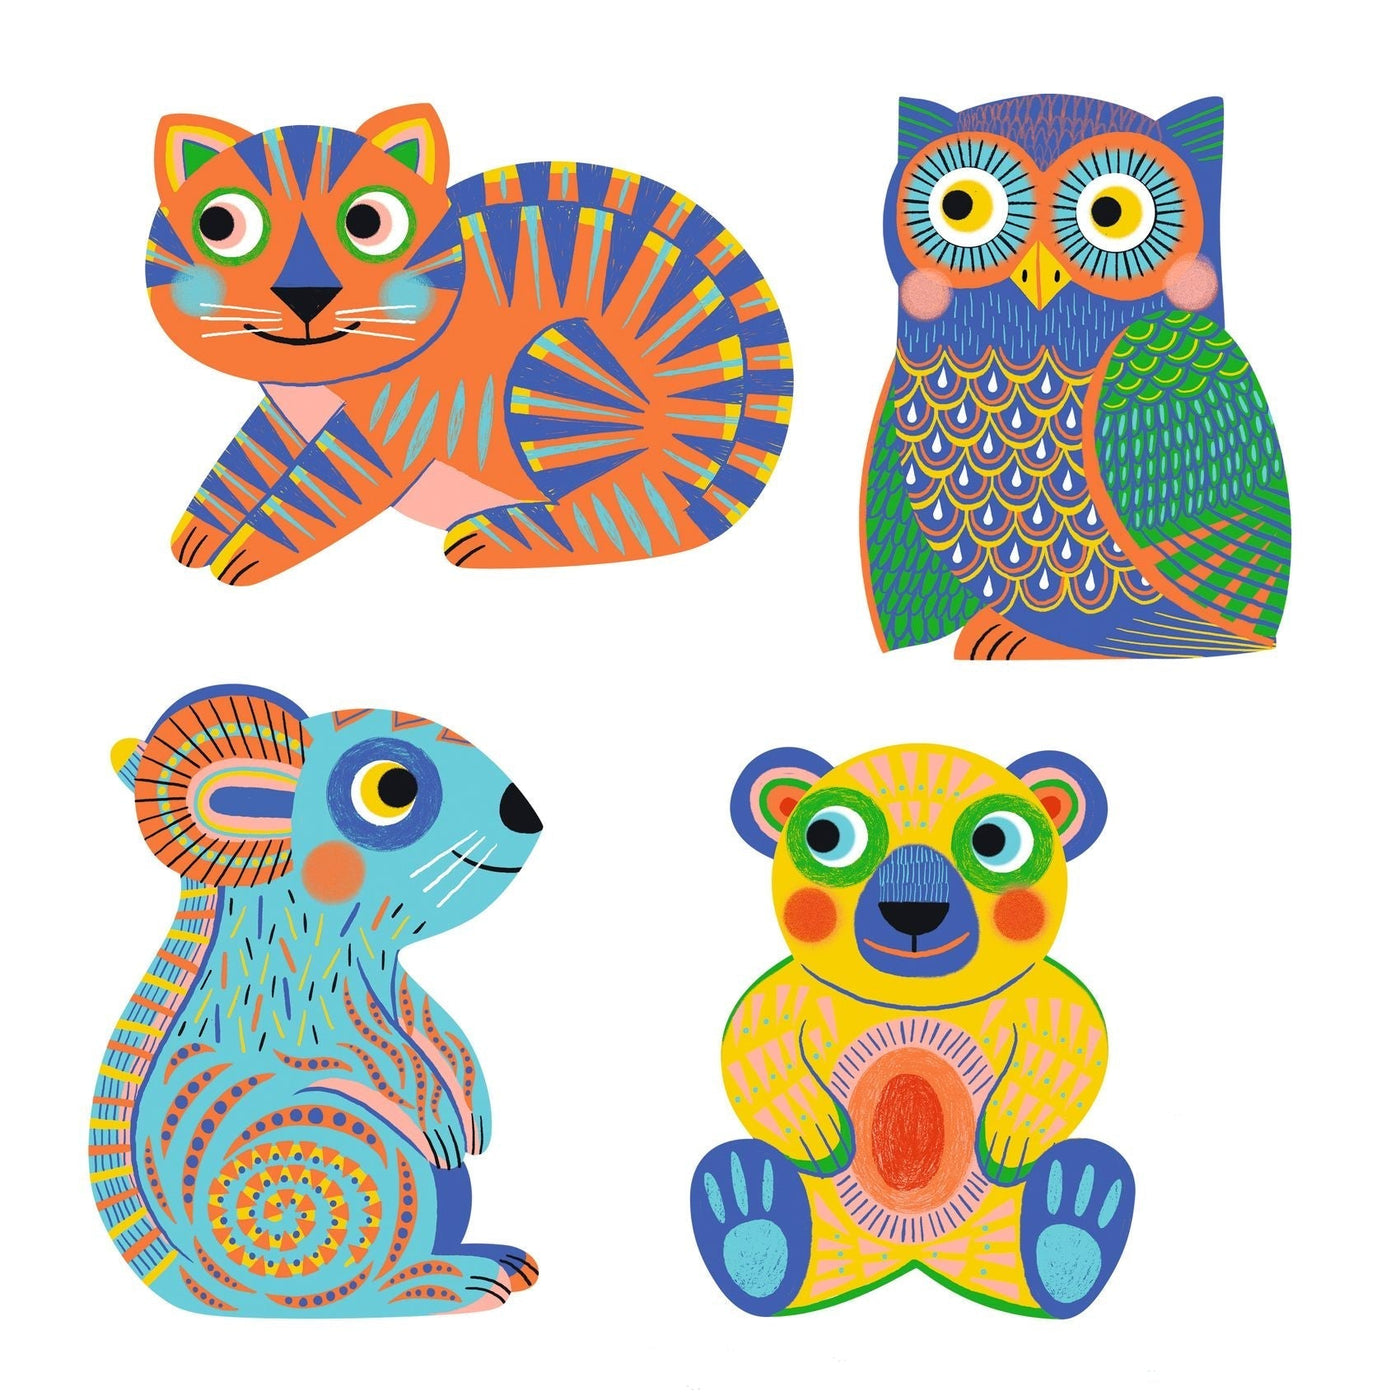 Animalo-Ma - Small Gifts For Little Ones - Colouring